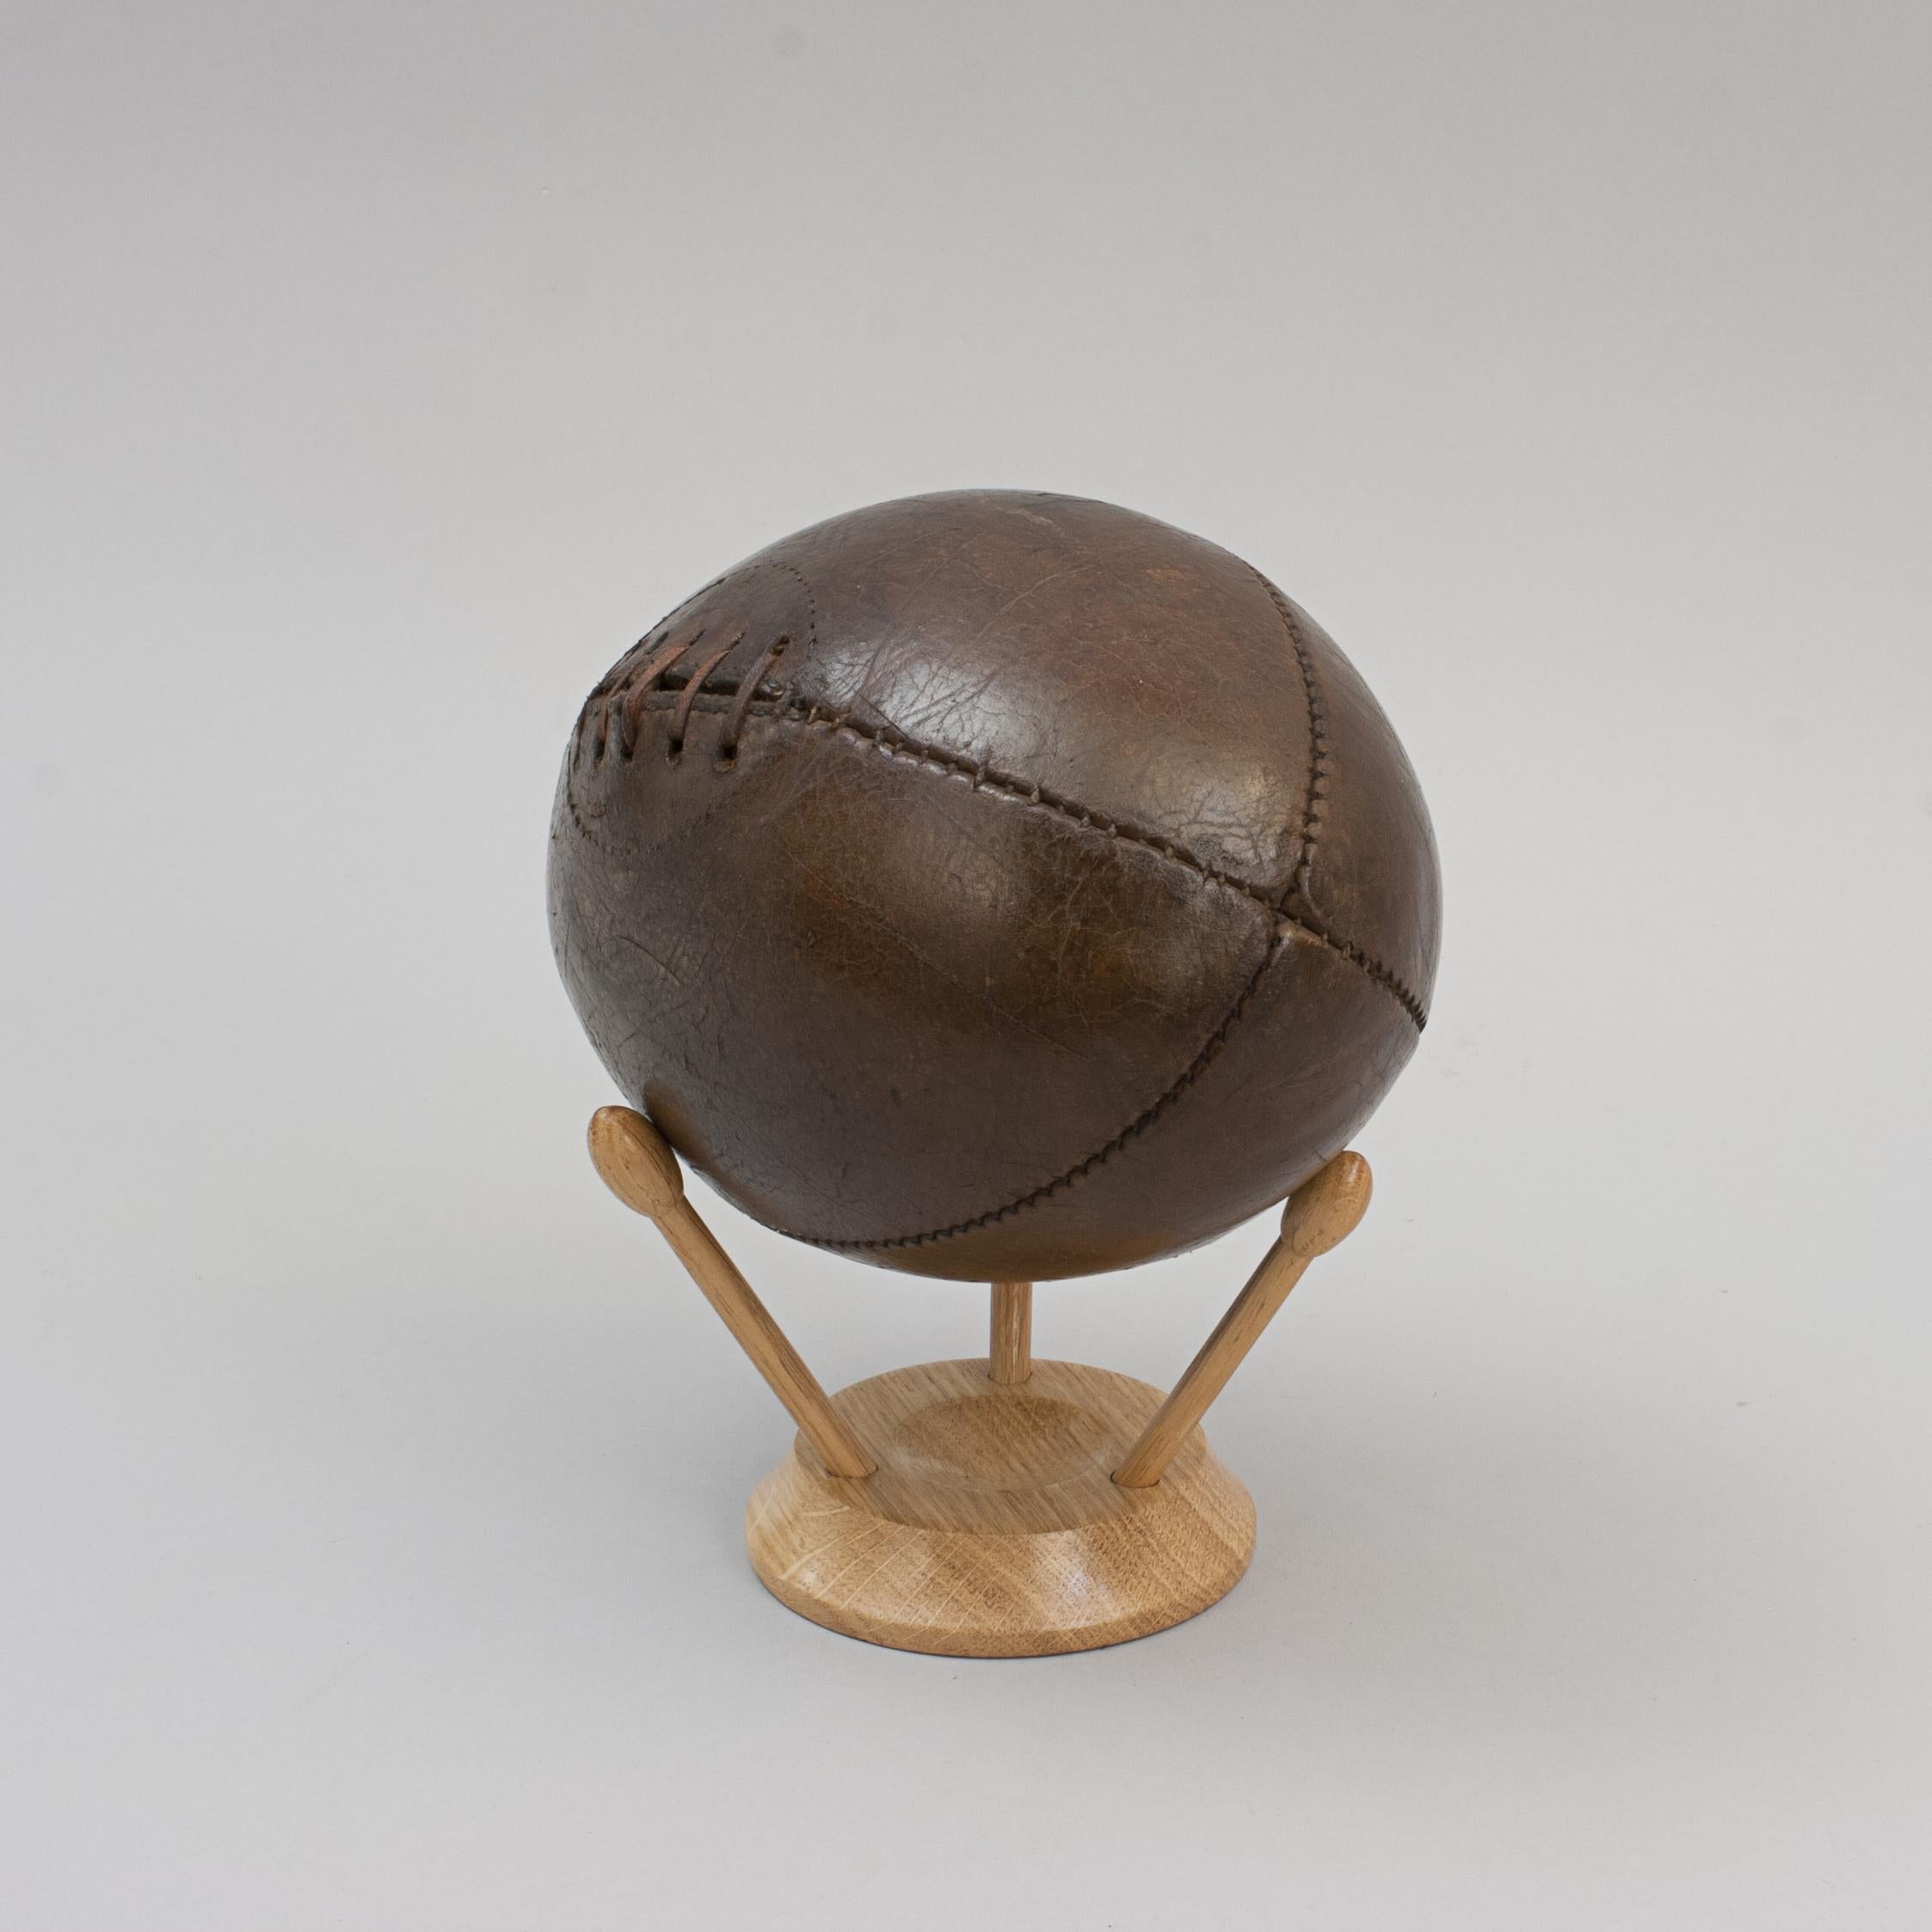 Original Antique Leather Rugby Ball 1